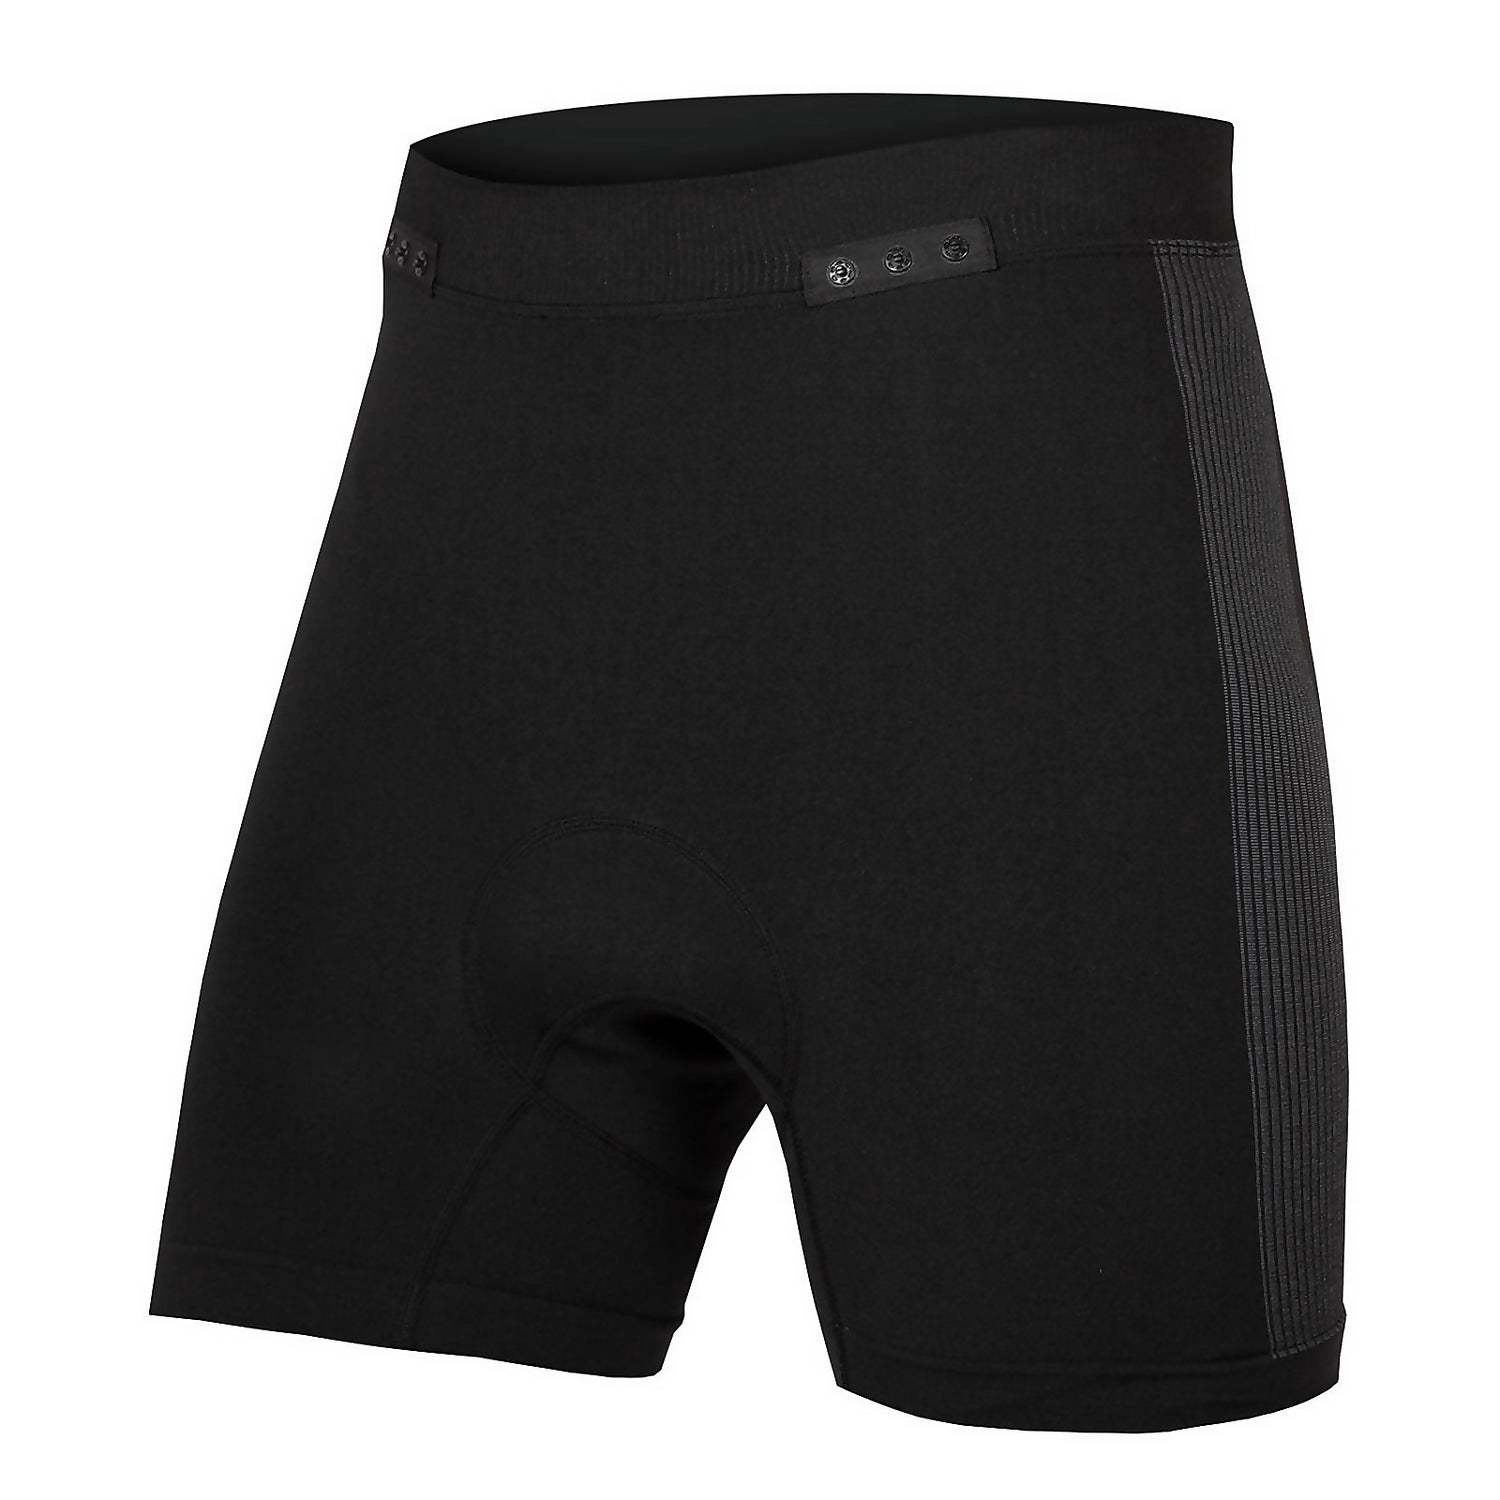 Engineered Padded Boxer with Clickfast - Black - S